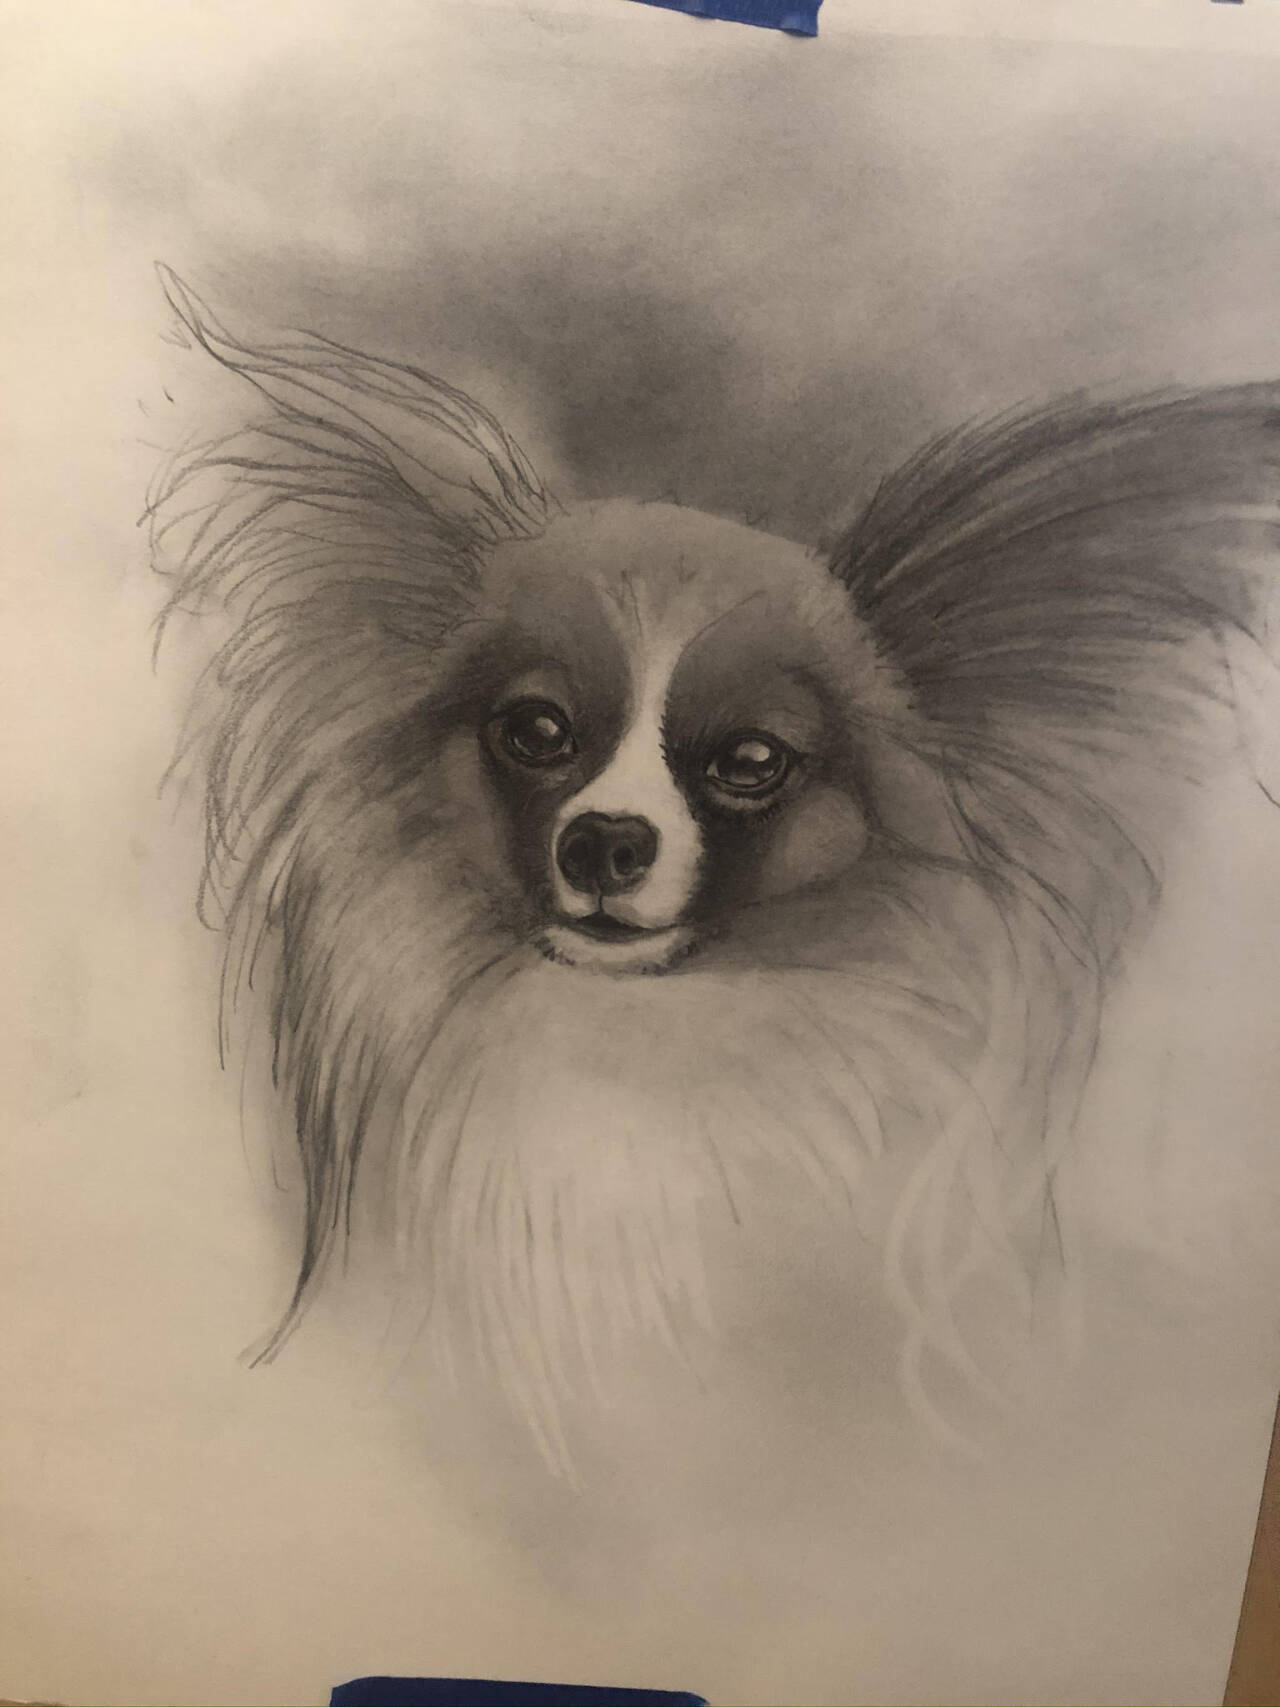 Photo courtesy of Dave Montague / Artist Dave Montague garnered attention for his work when sharing this drawing on social media. Customers started requesting portraits of their own pets.